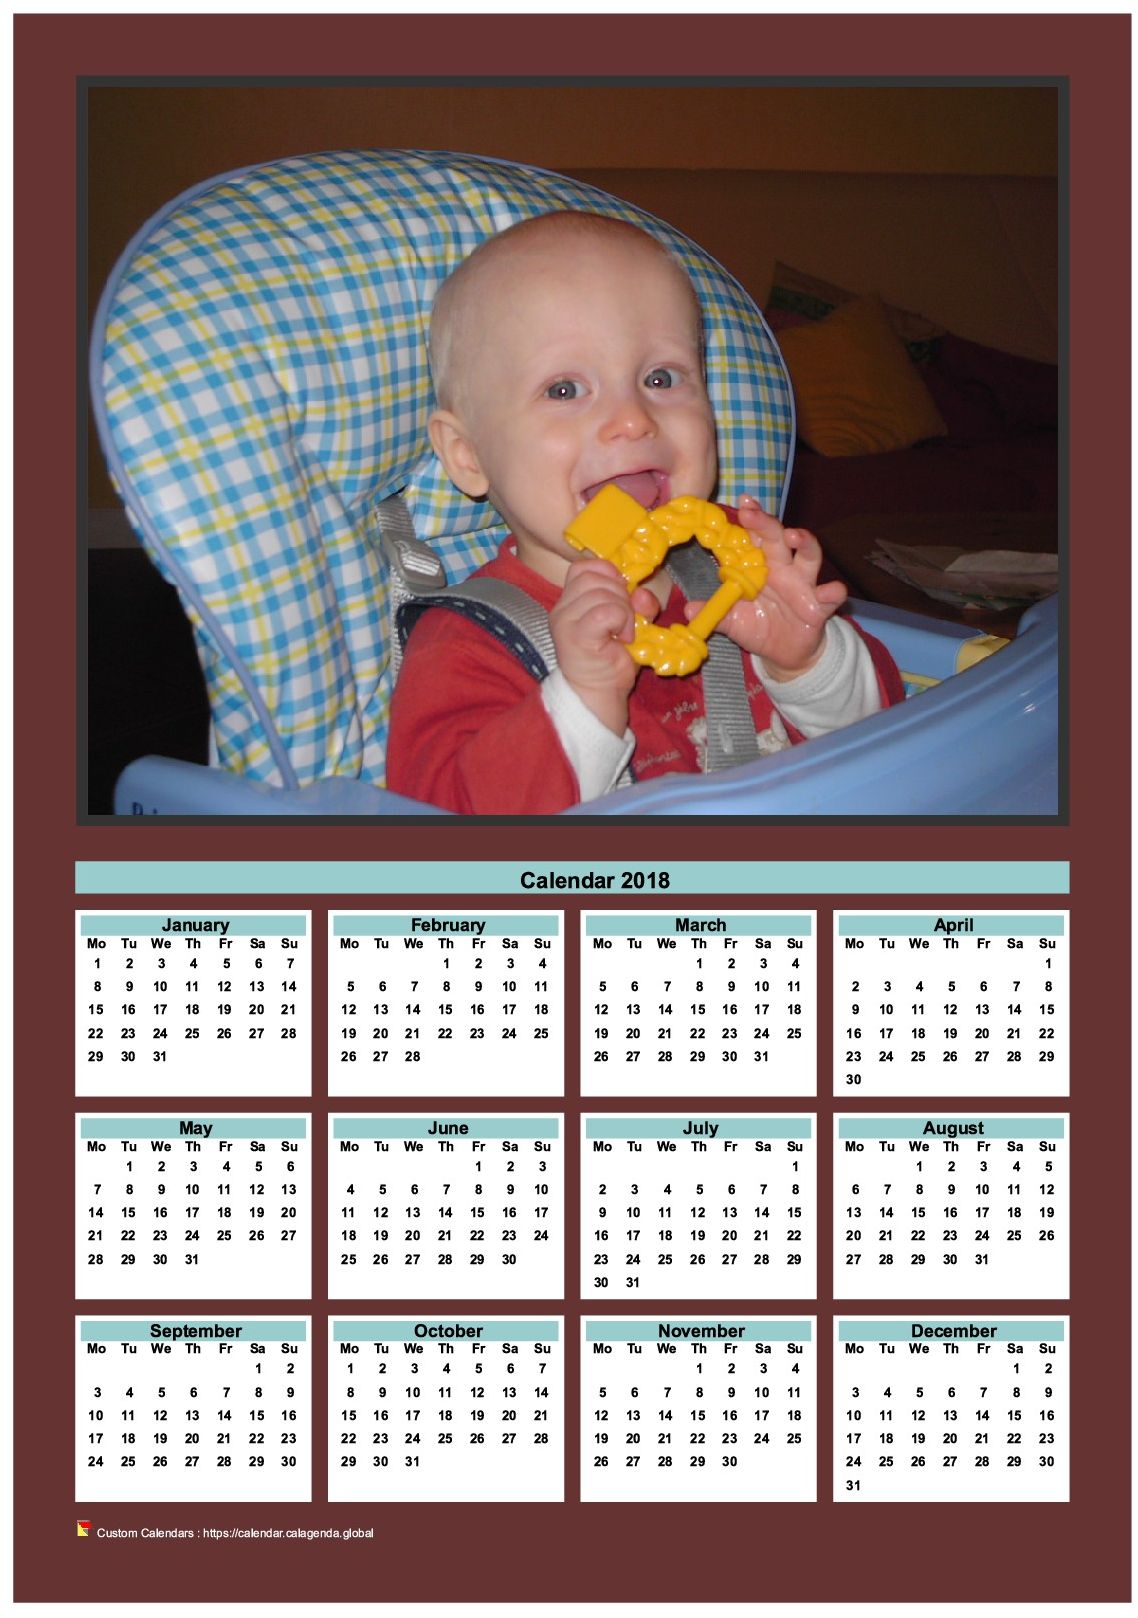 Calendar 2018 annual to print with family photo